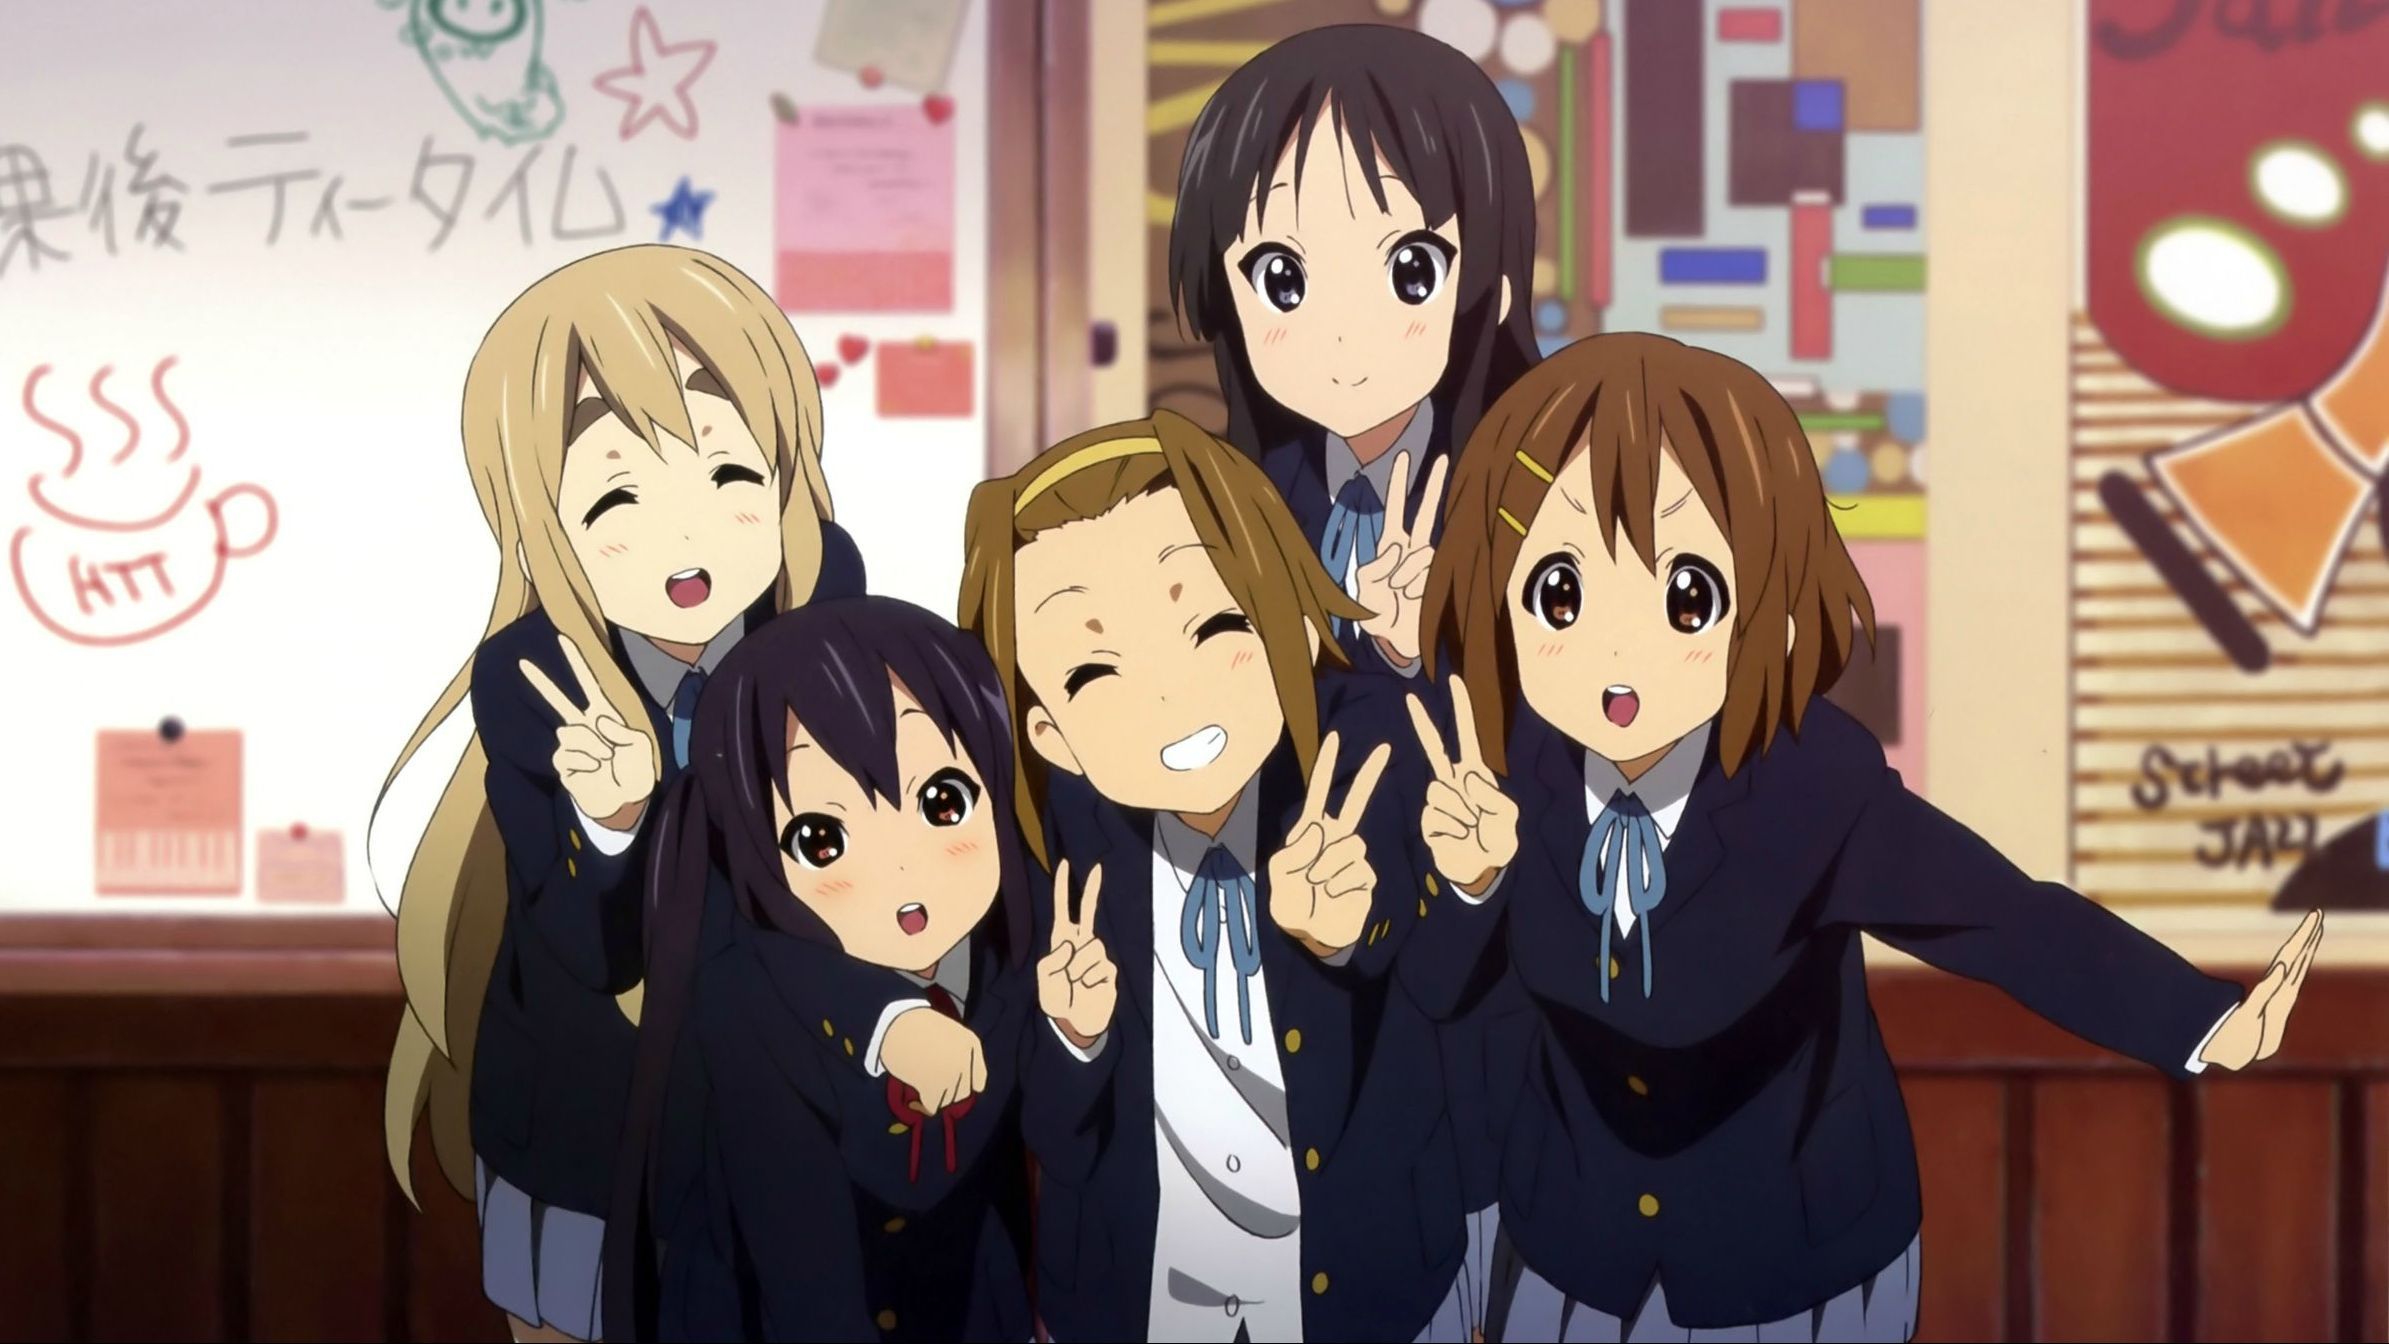 Poke'K-ON Episode 1 The First Day